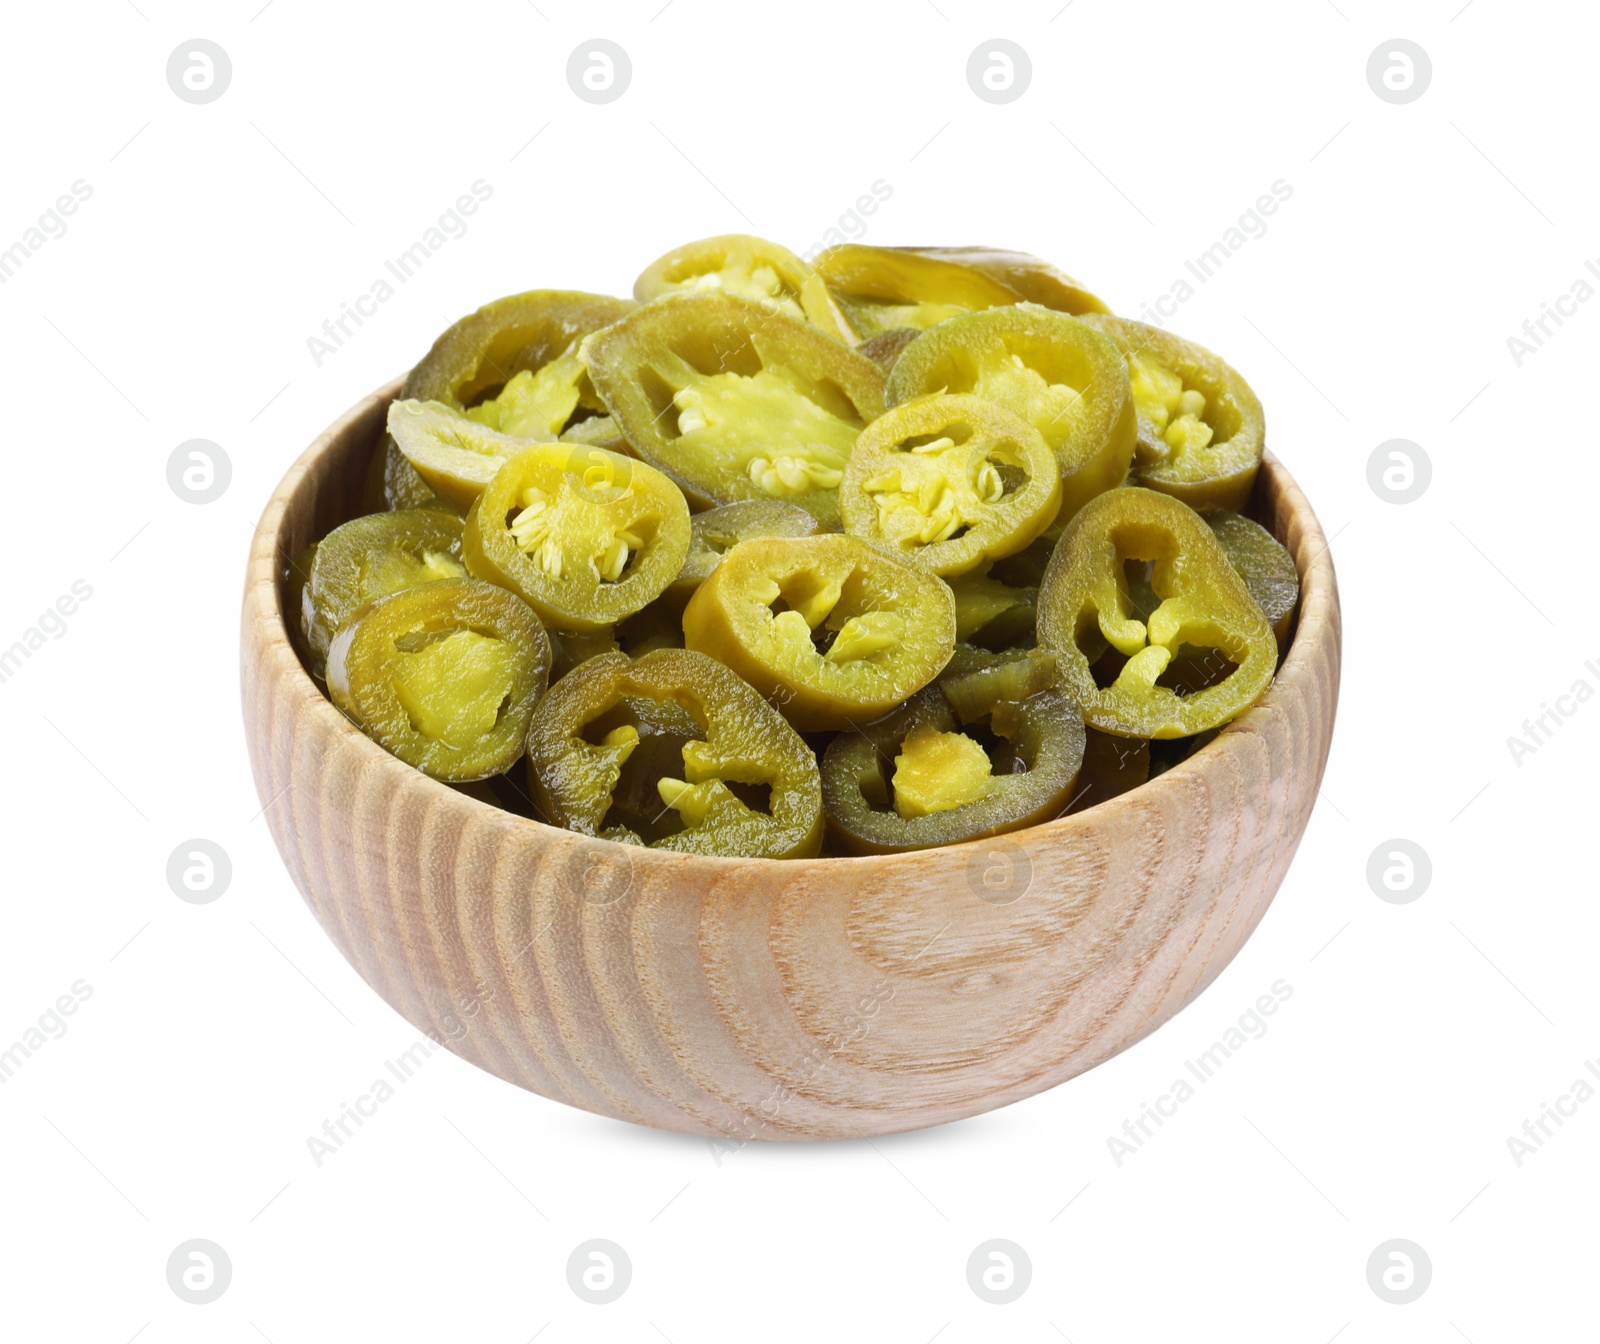 Photo of Slices of pickled green jalapenos in wooden bowl isolated on white